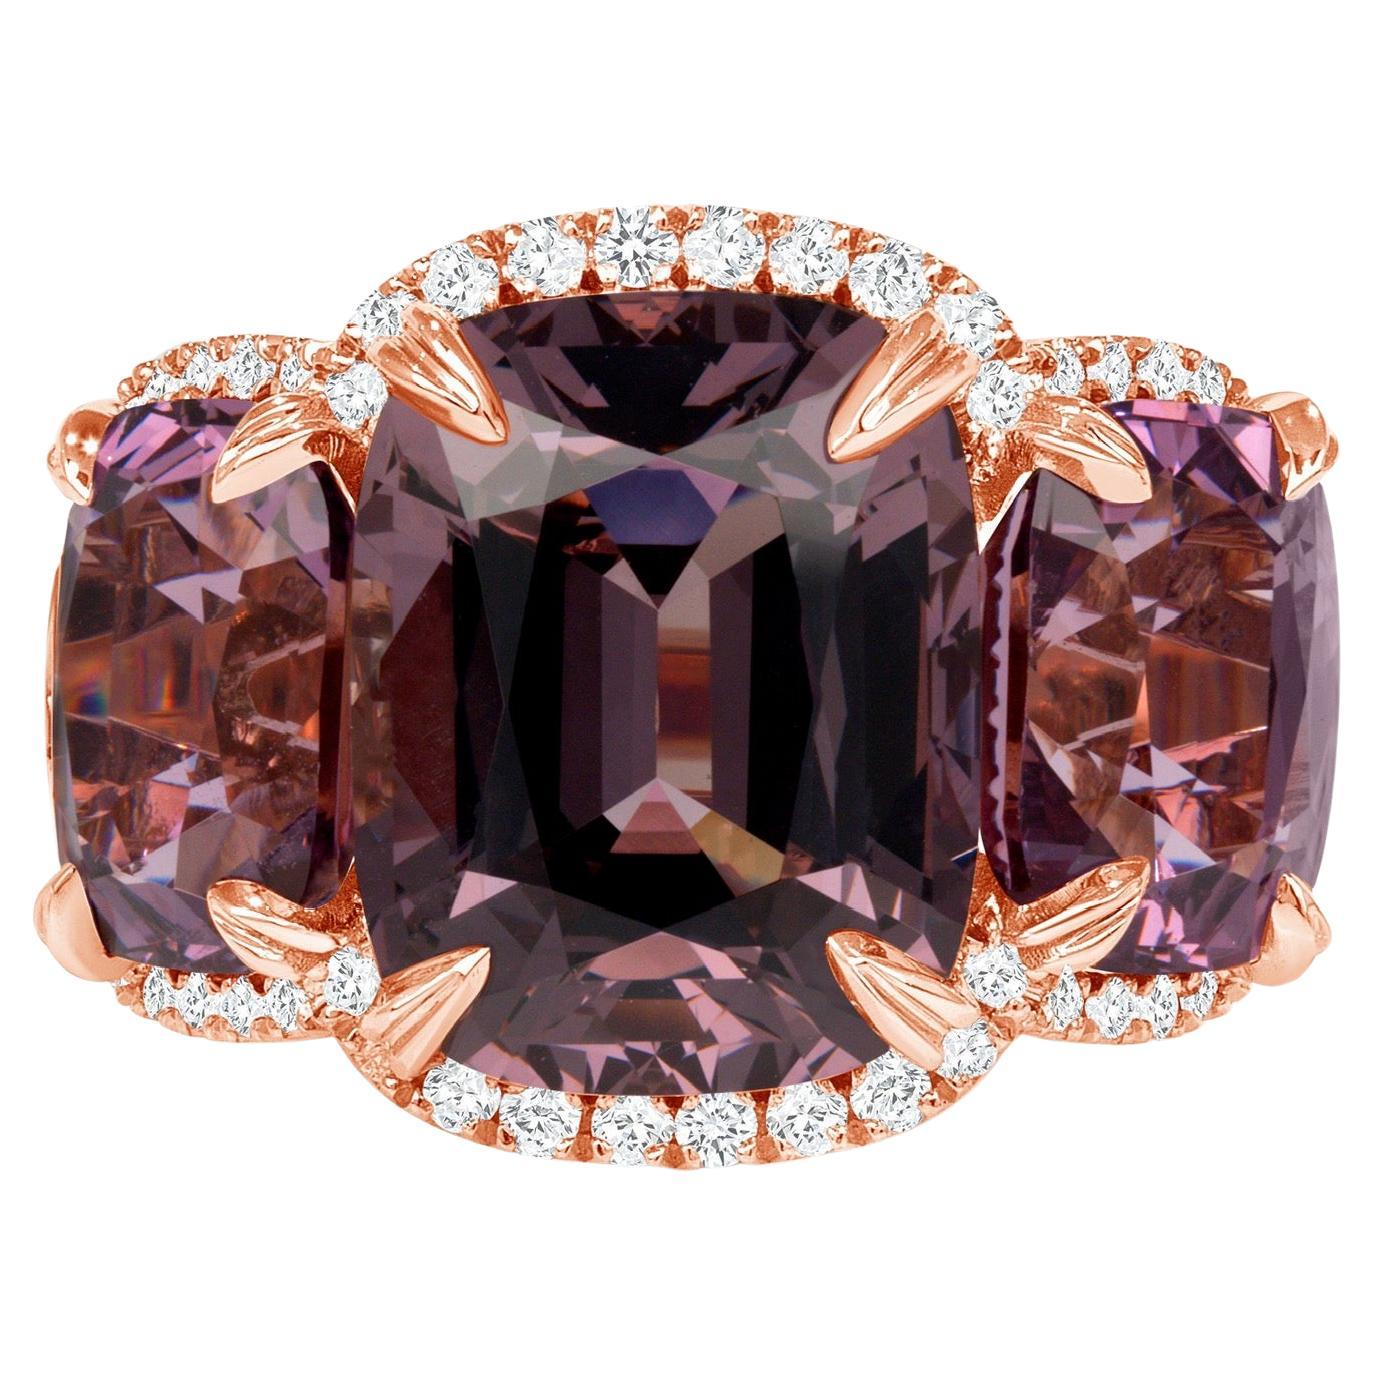 15.67ct Burmese Spinel ring in 18K rose gold. GIA certified. For Sale